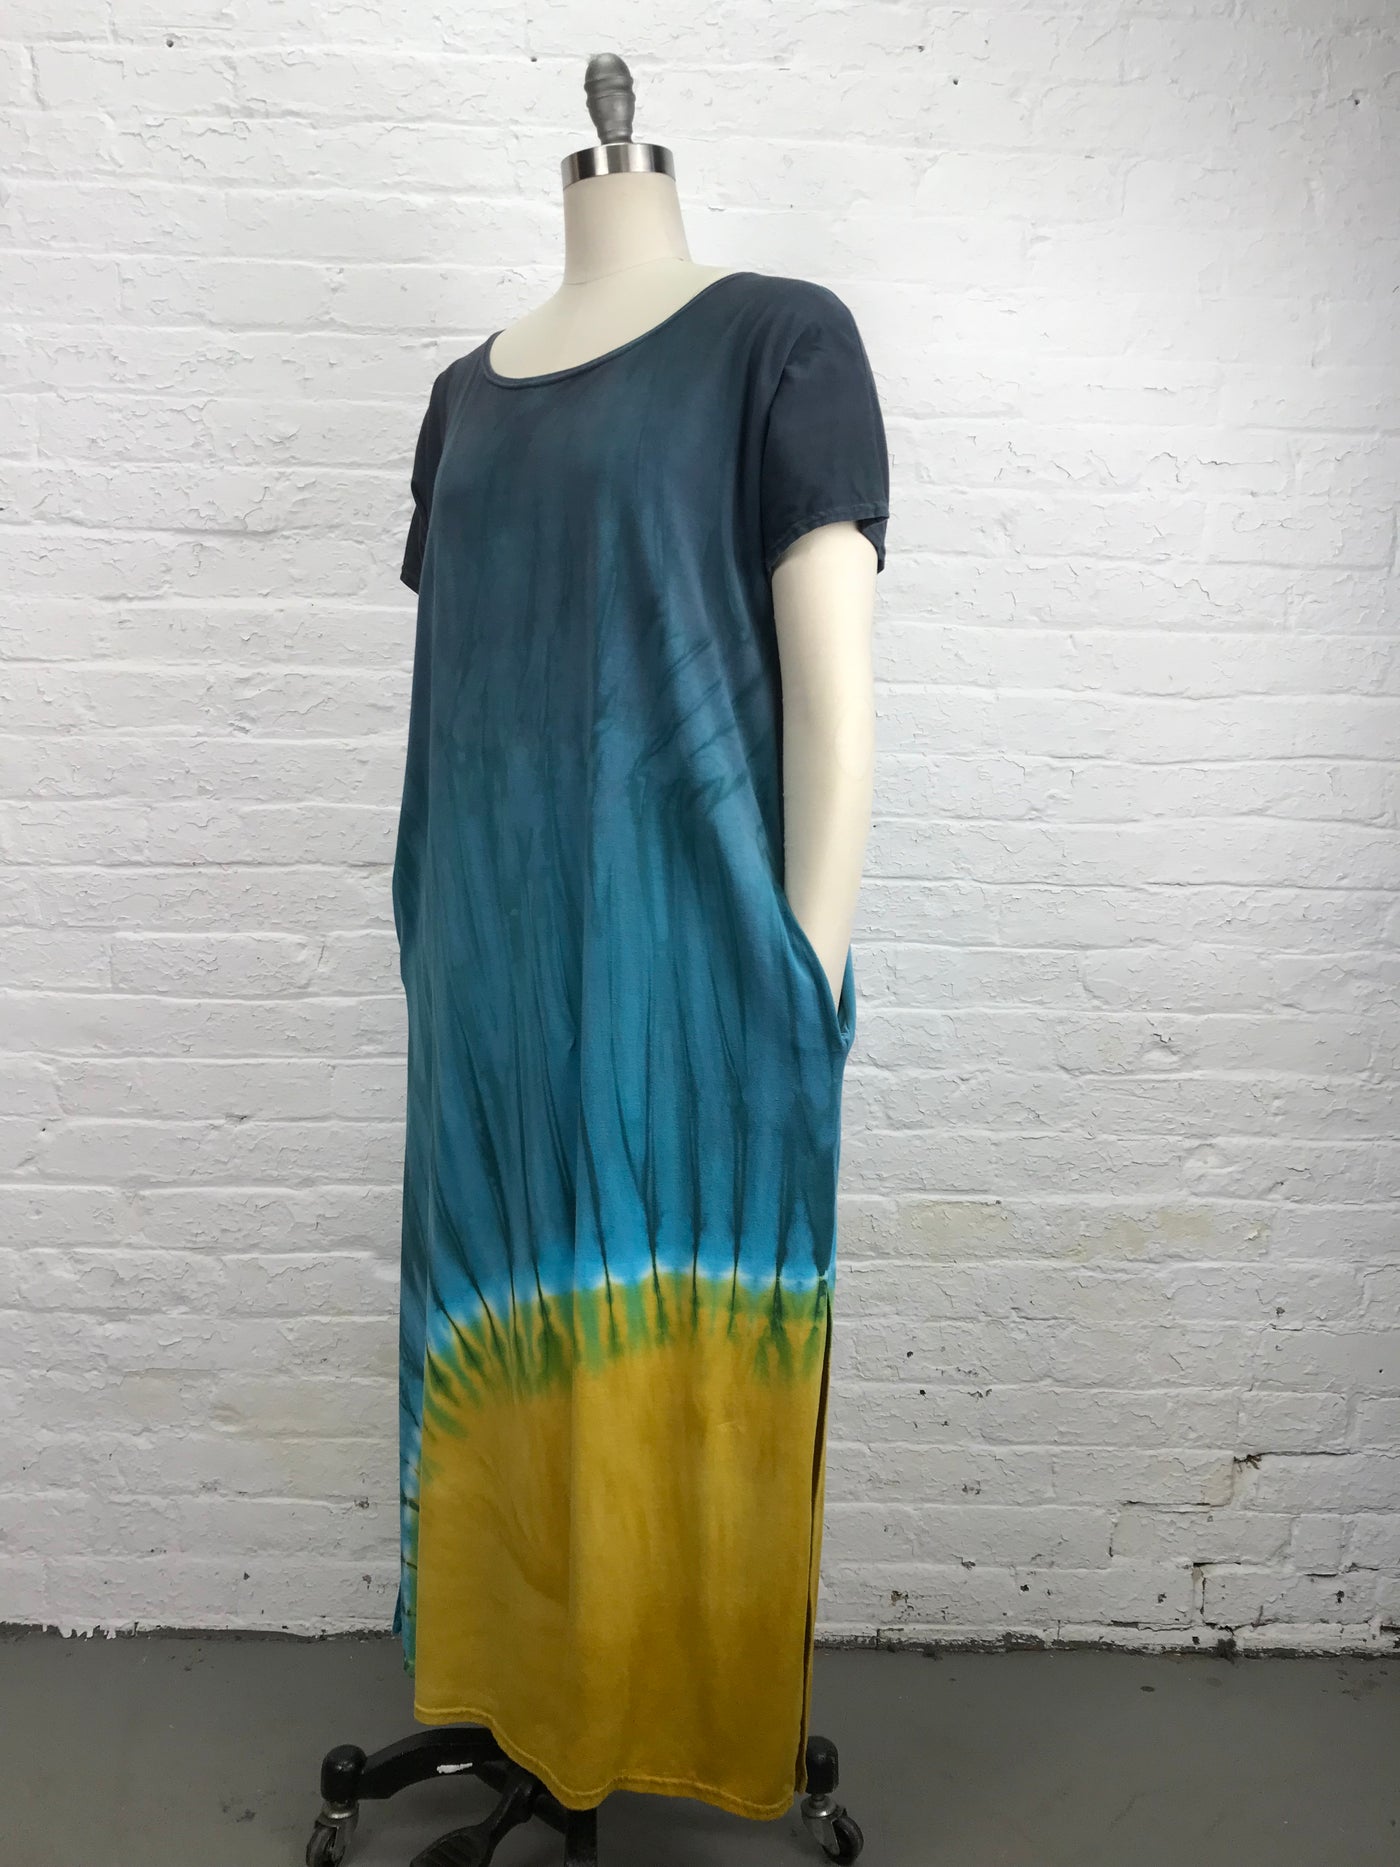 The Astrid Maxi Dress in Sunshine has pockets and is hand dyed in gold and turquoise ombre